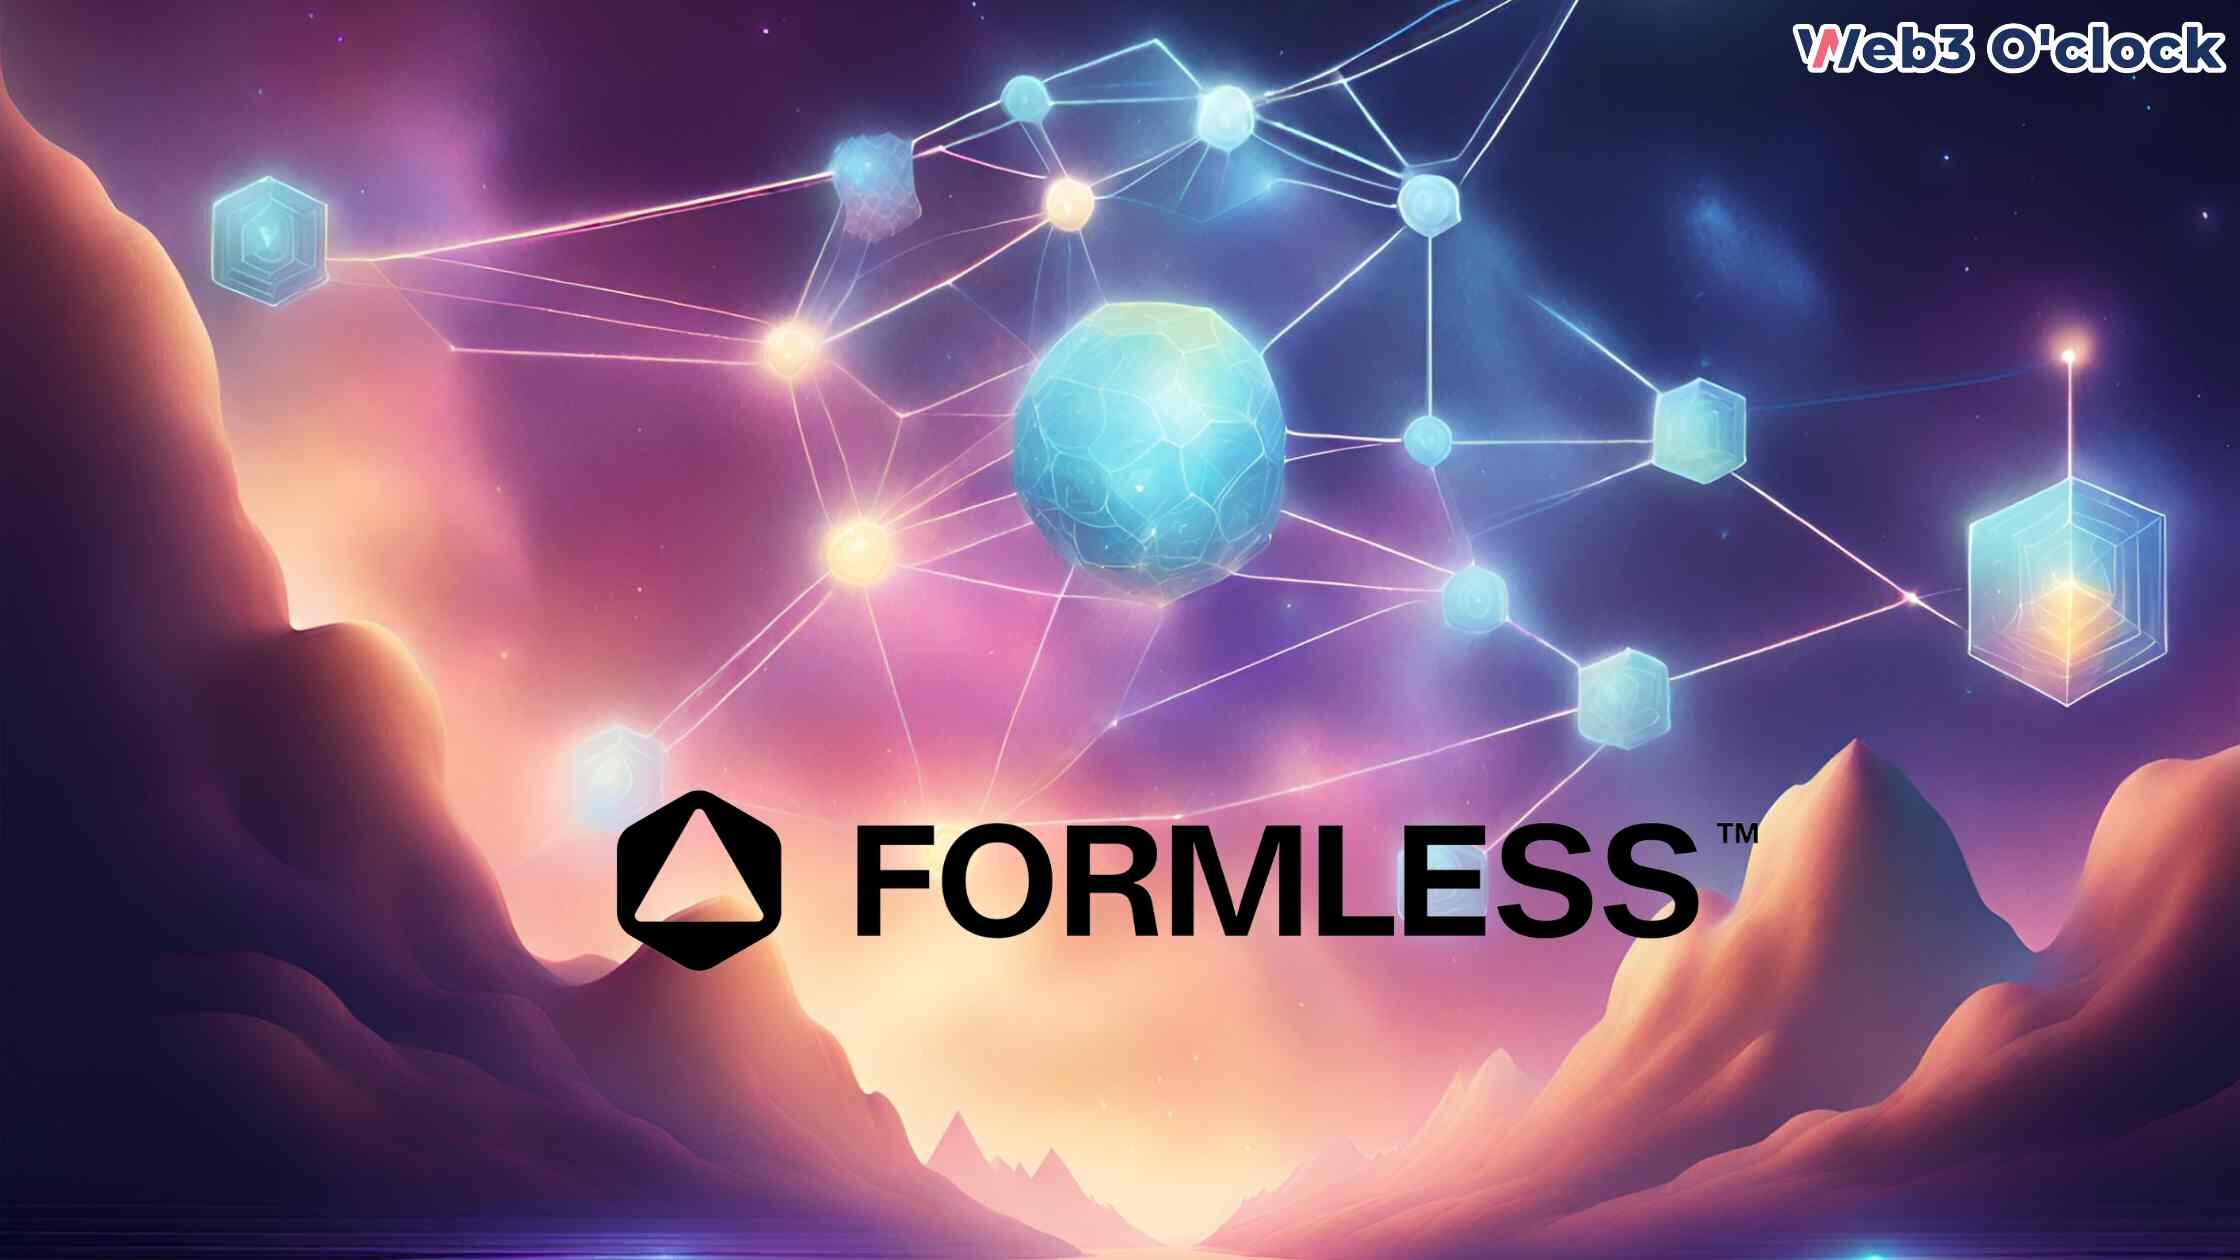 Formless Secures $2.2 Million by Web3 o'clock